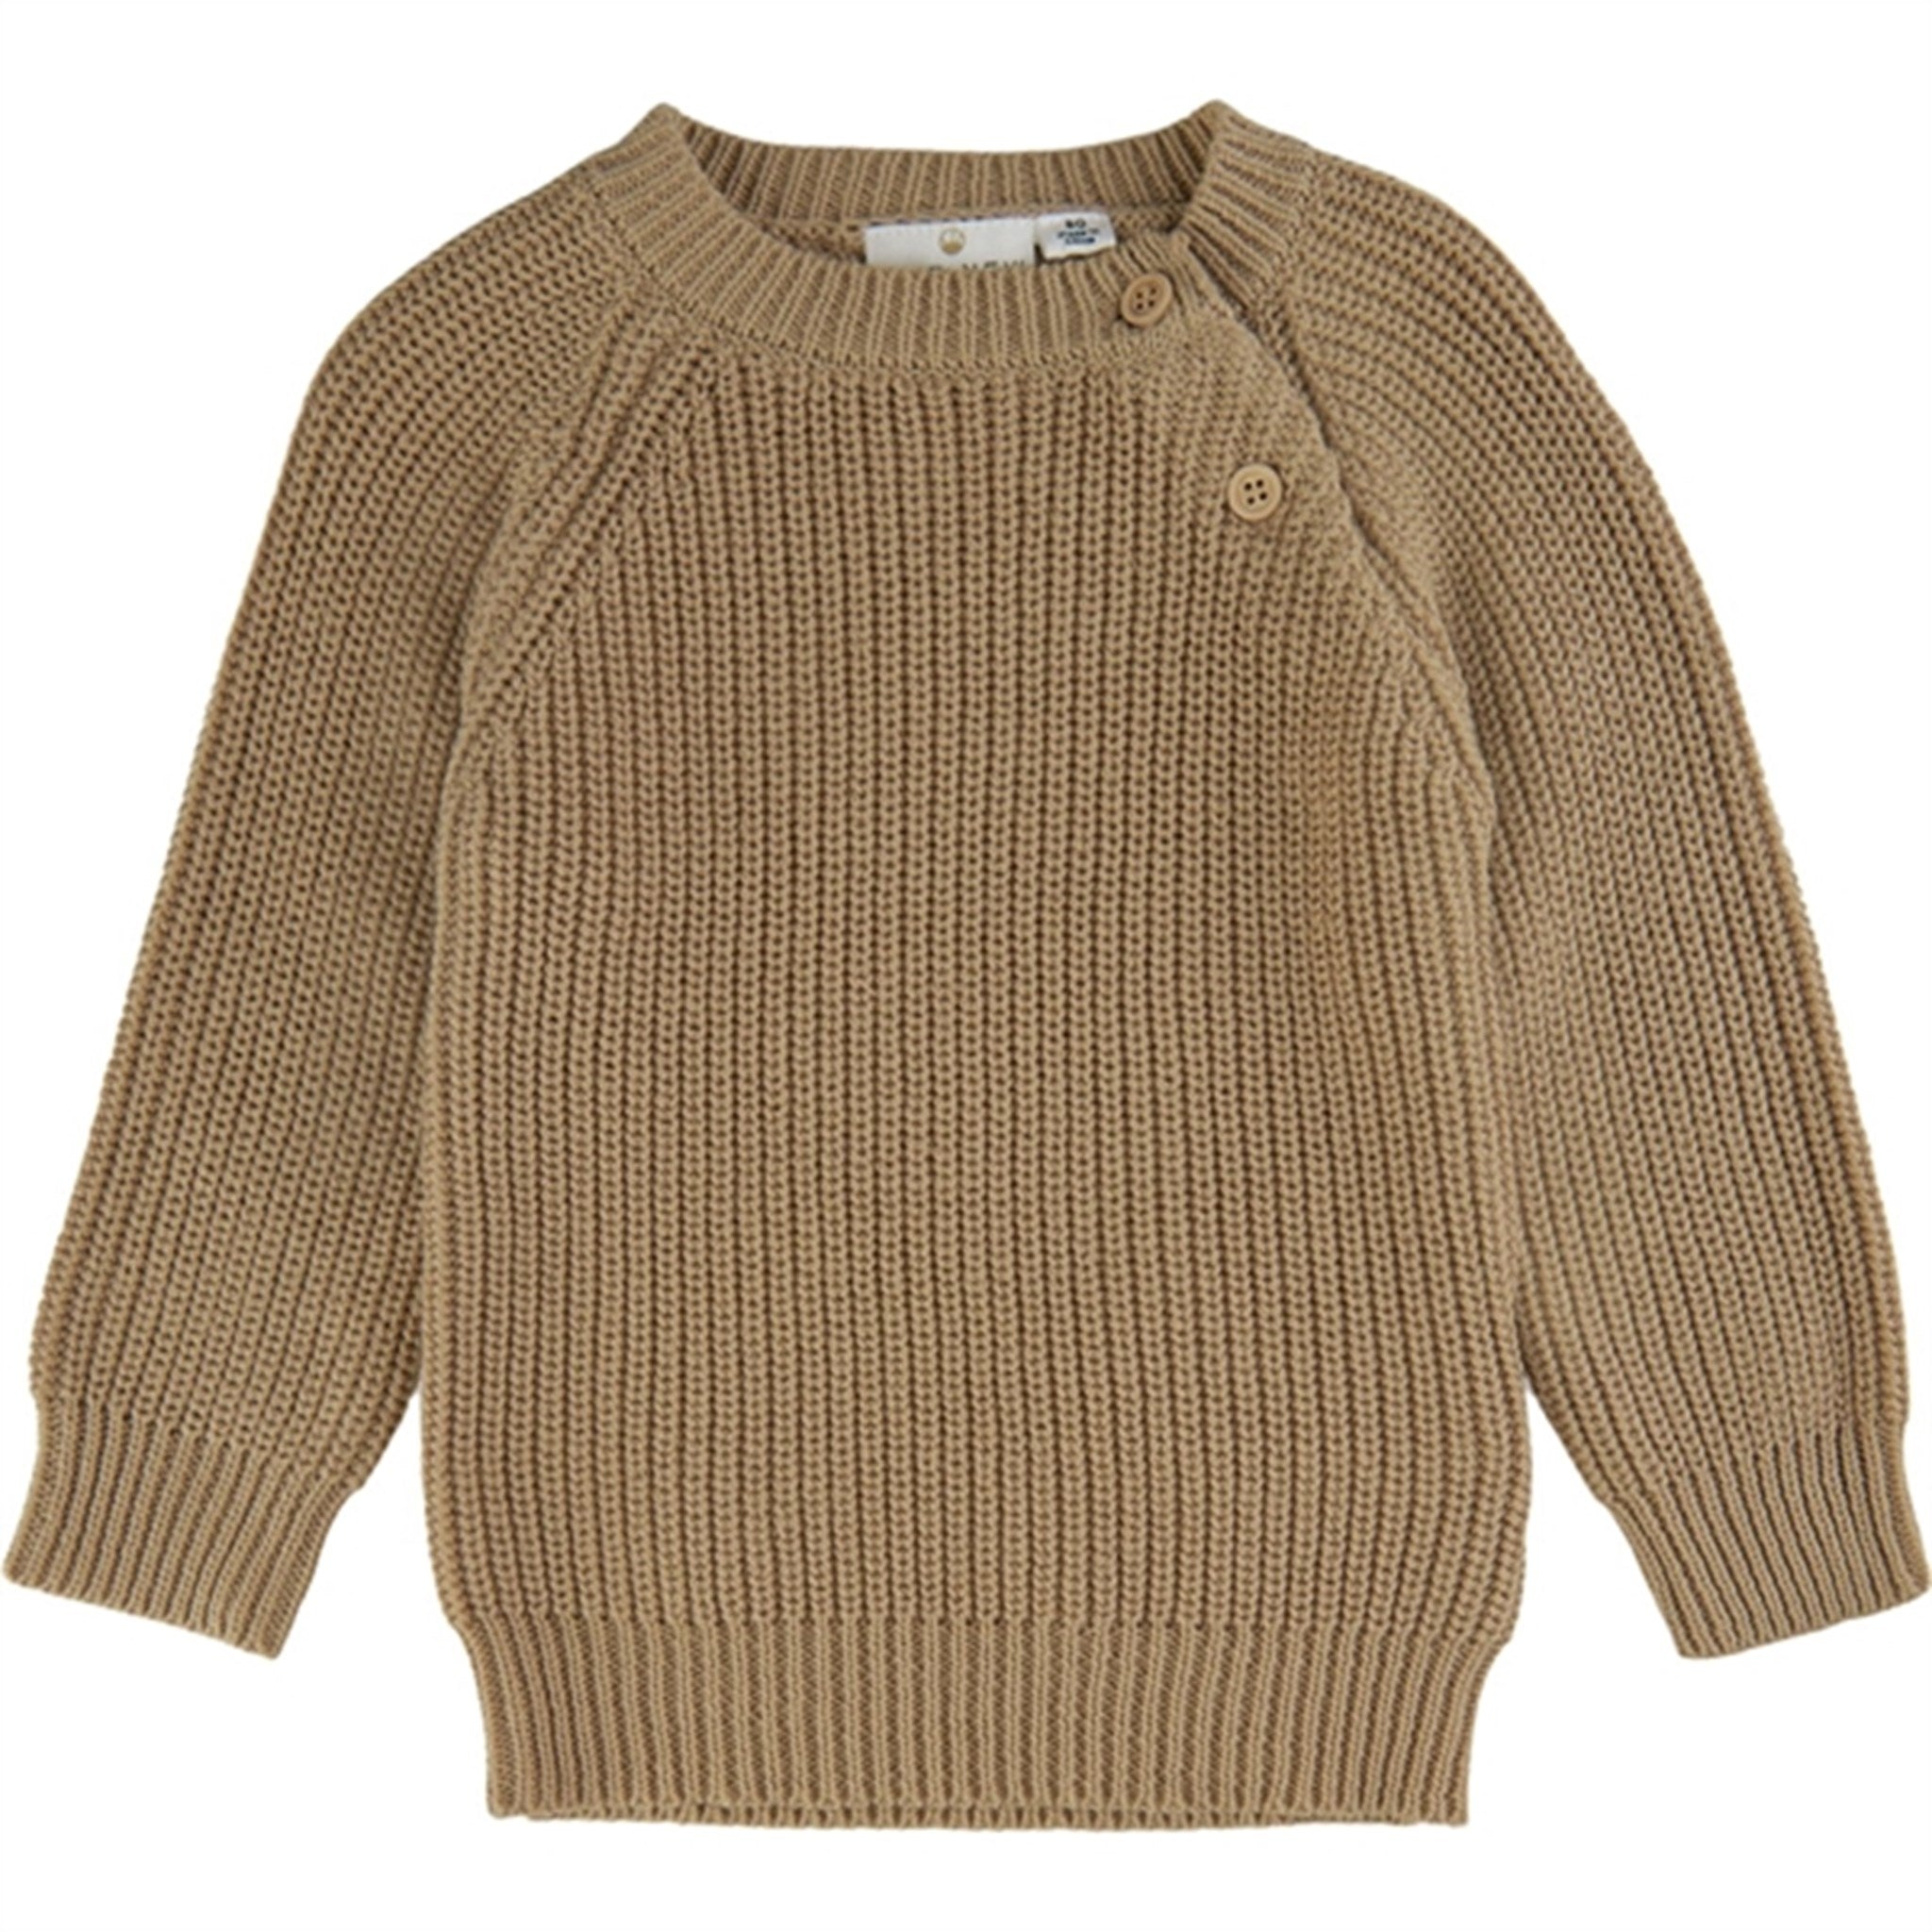 THE NEW Siblings Sesame Elfred Knit